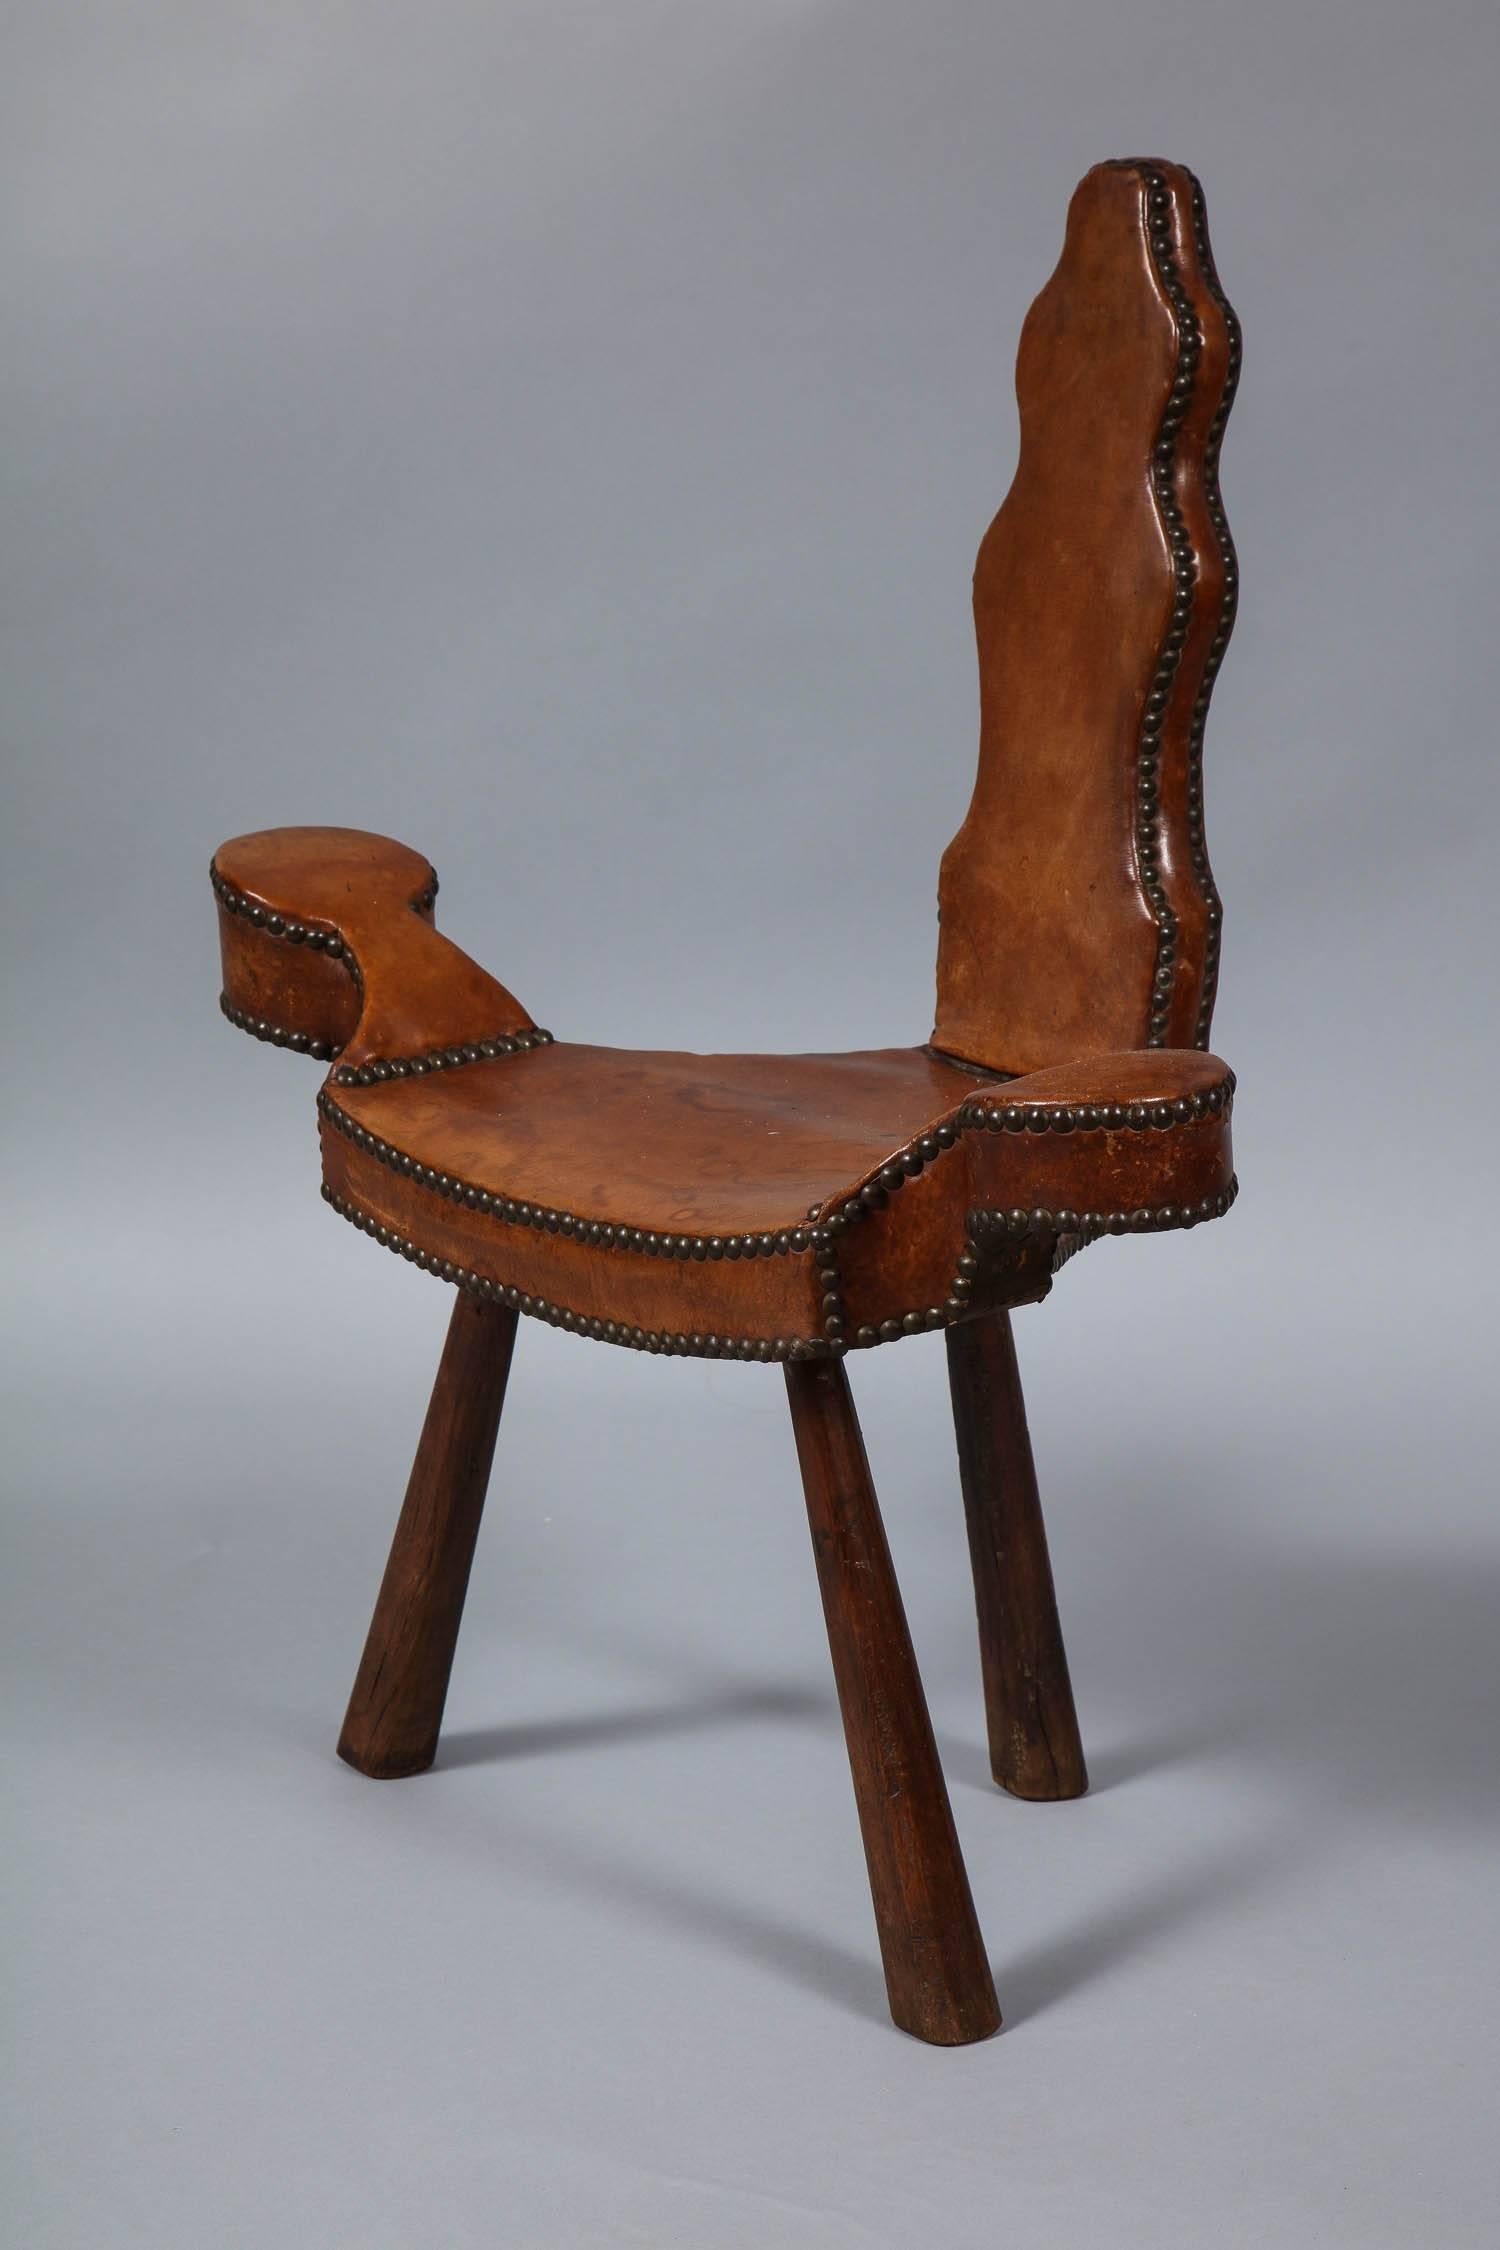 Early 20th Century Leather Studded Diminutive Chair